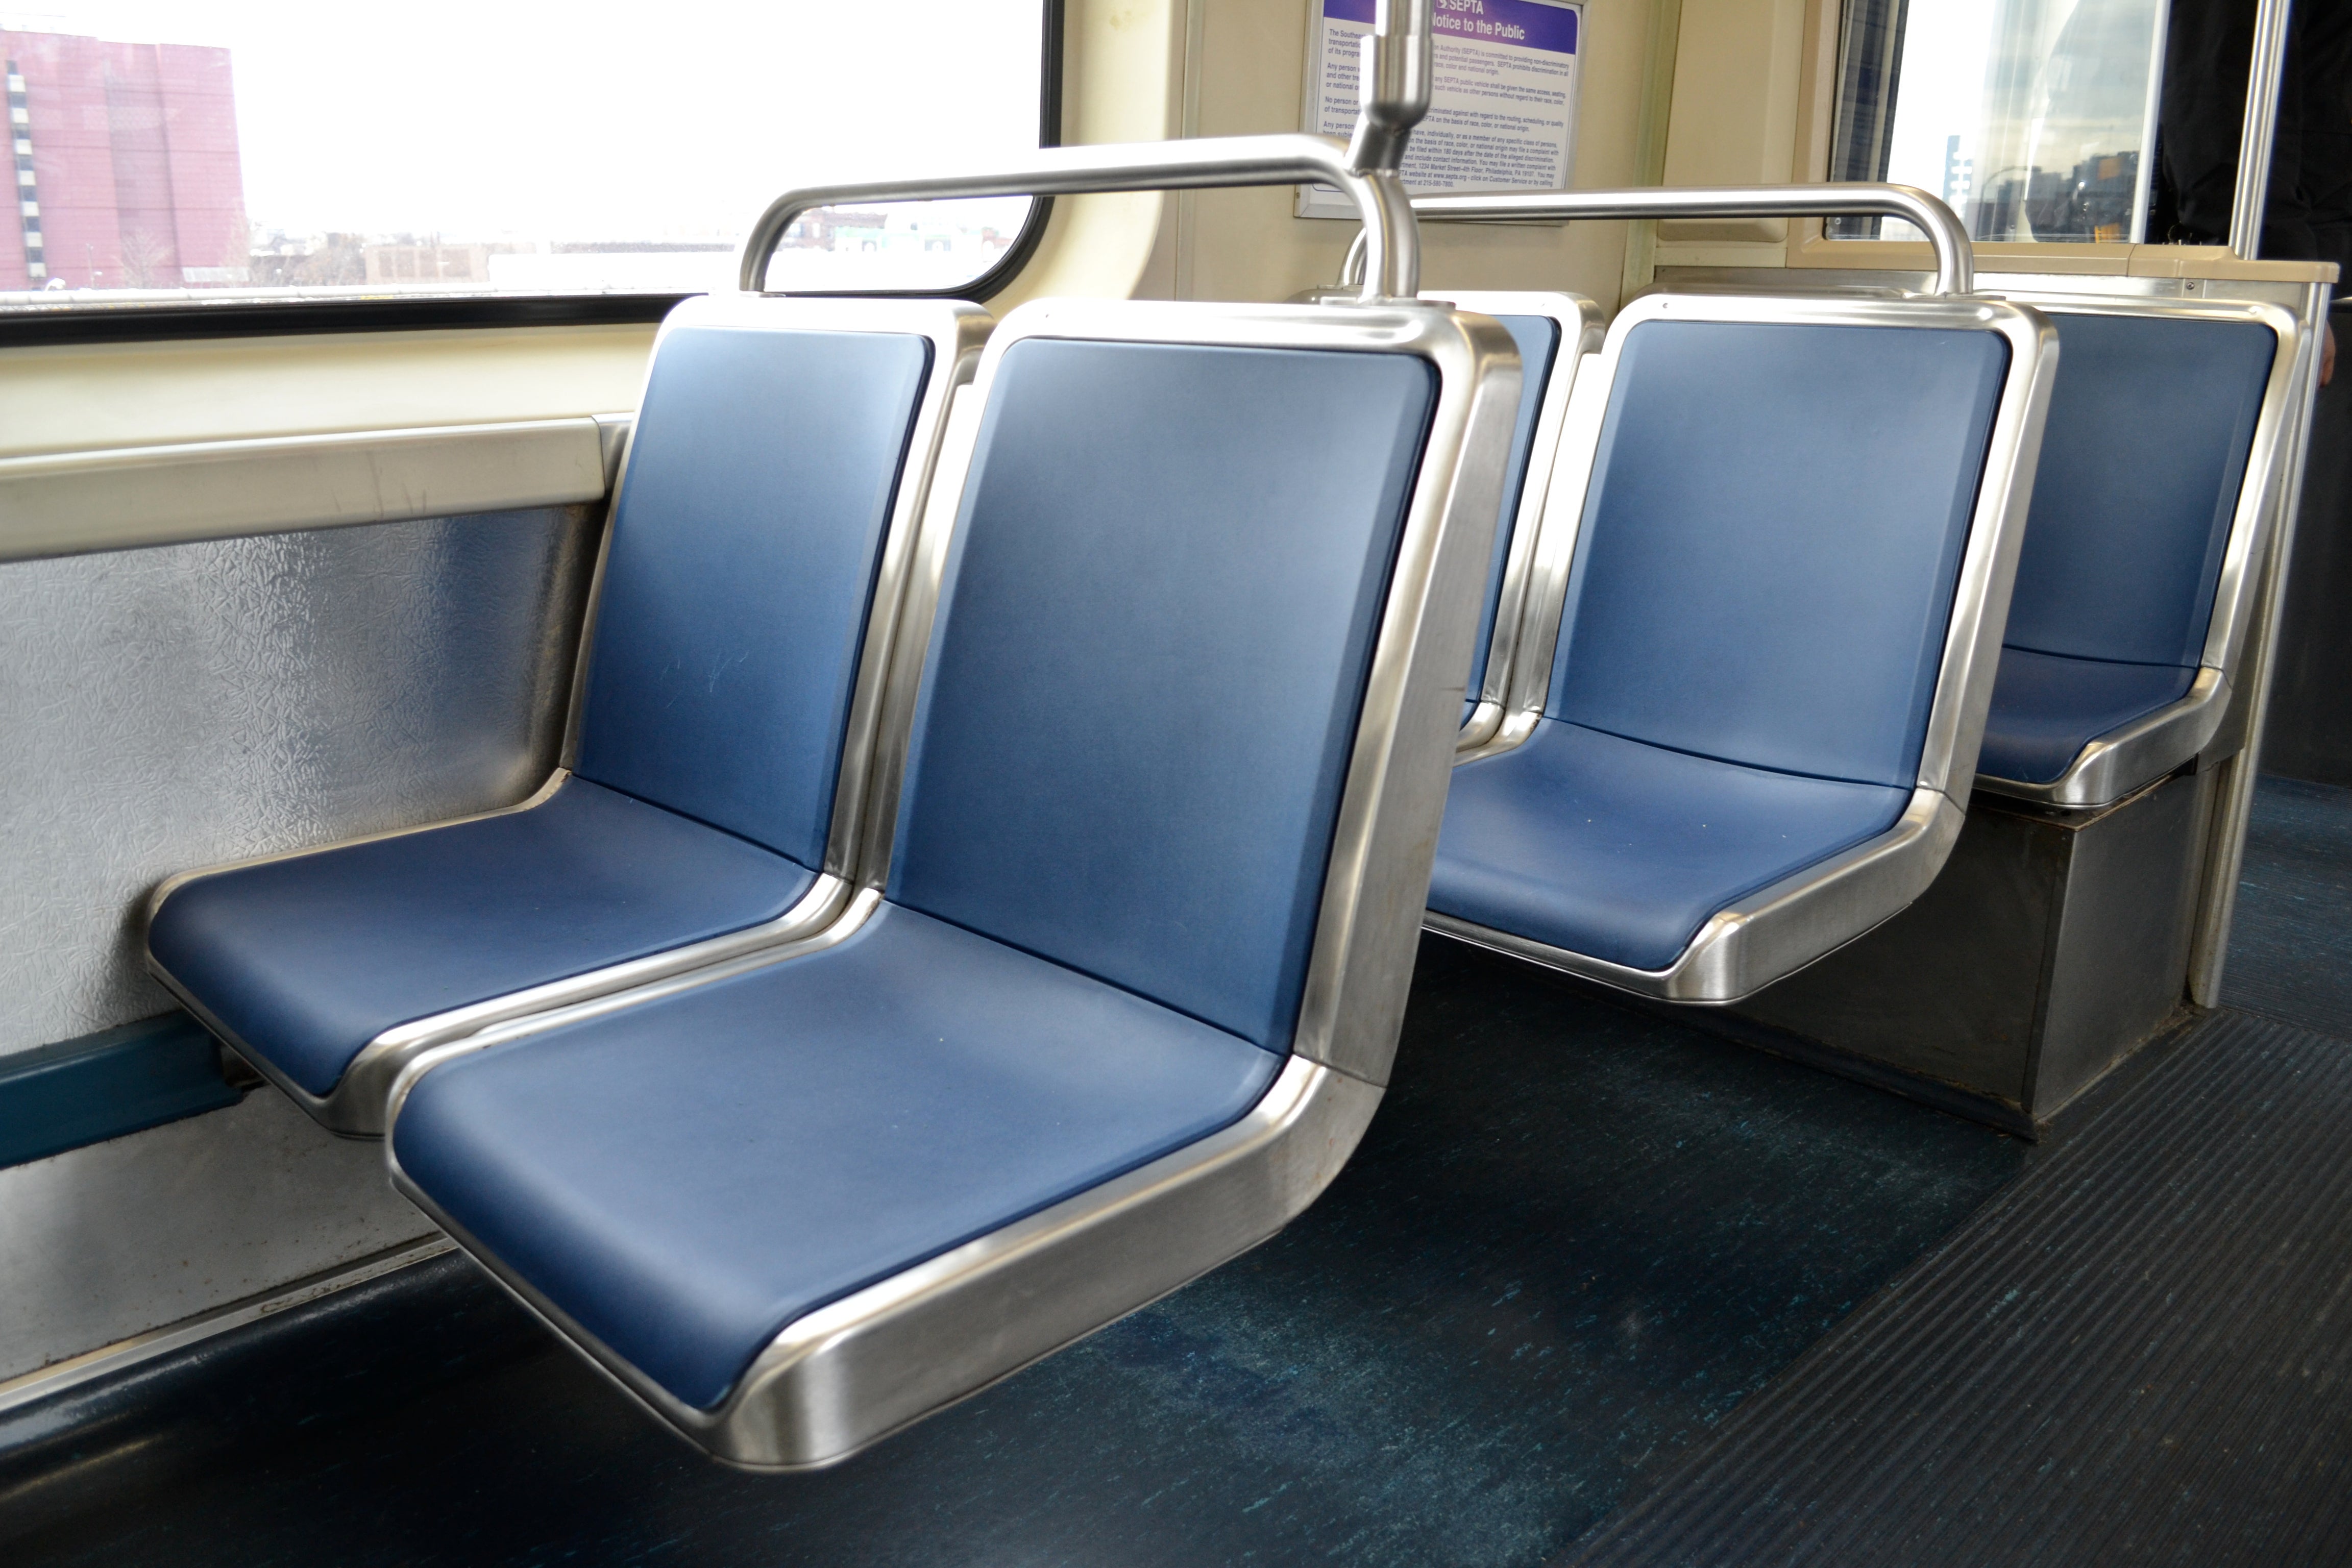 Say Goodbye To Cloth Seats On The El Whyy